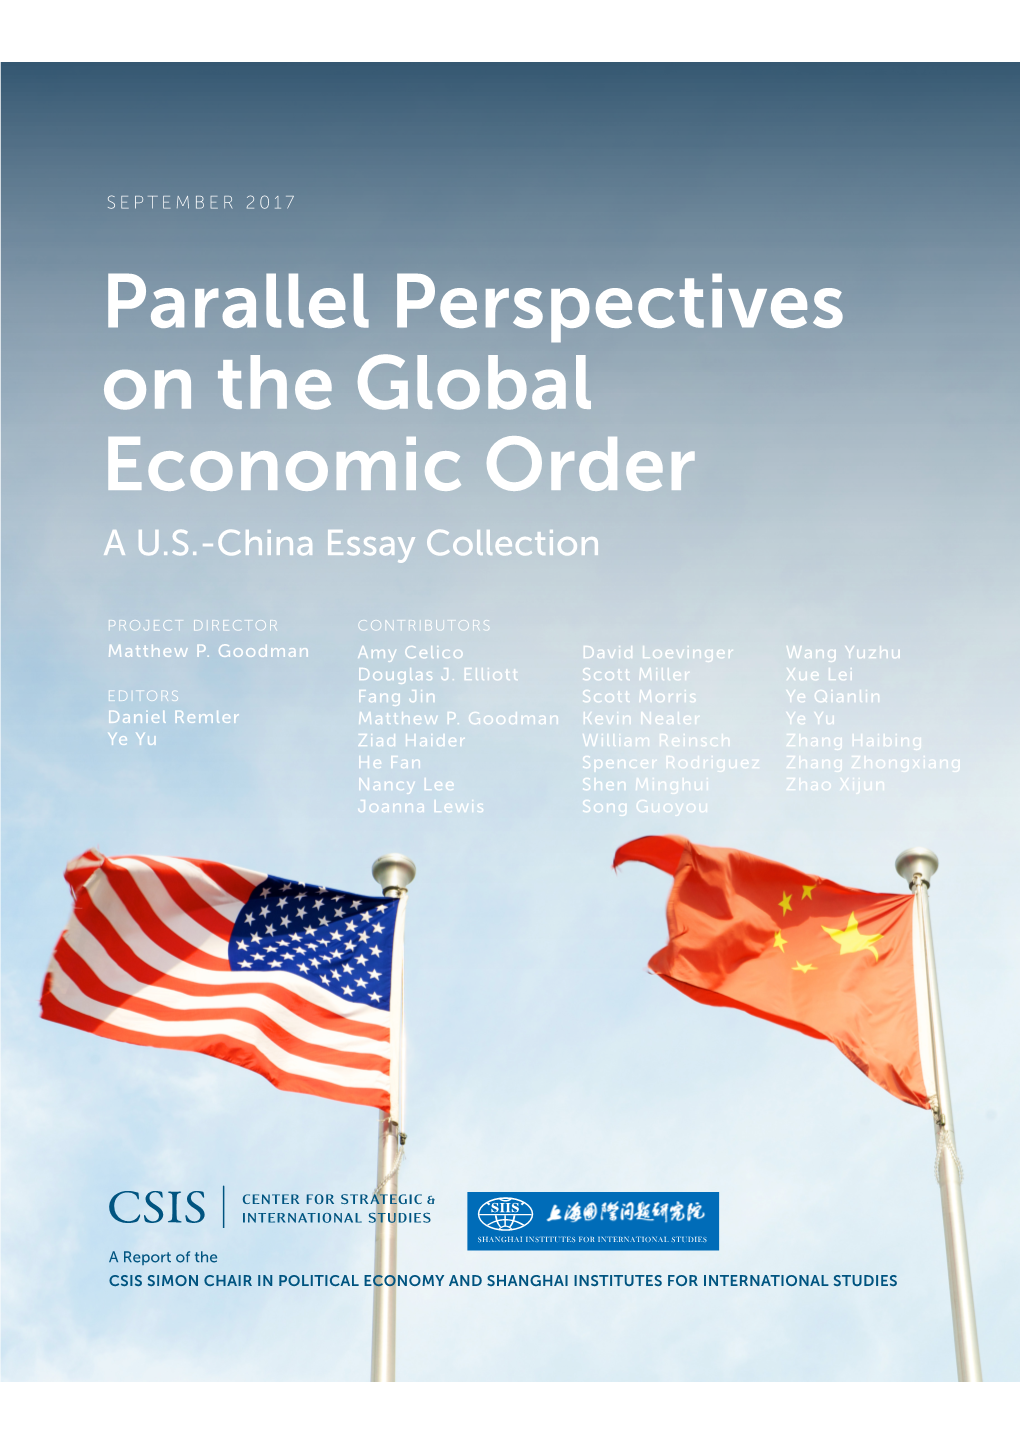 Parallel Perspectives on the Global Economic Order a U.S.-China Essay Collection